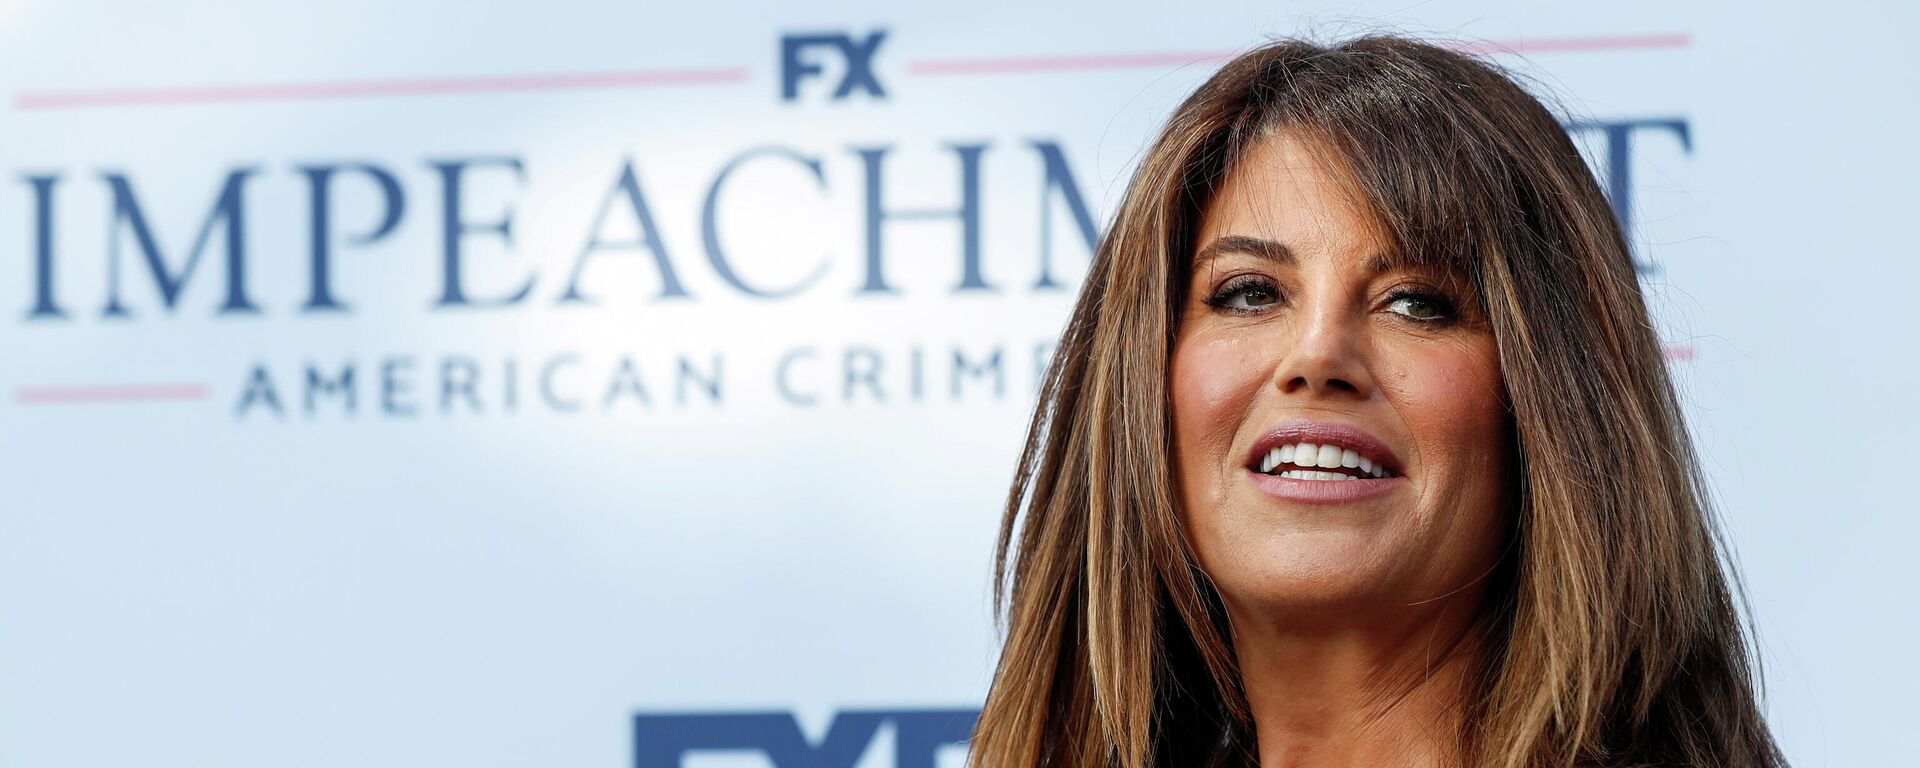 Producer Monica Lewinsky attends a red carpet event for the television show Impeachment: American Crime Story at Pacific Design Center in West Hollywood, California, September 1, 2021 - Sputnik International, 1920, 25.09.2021